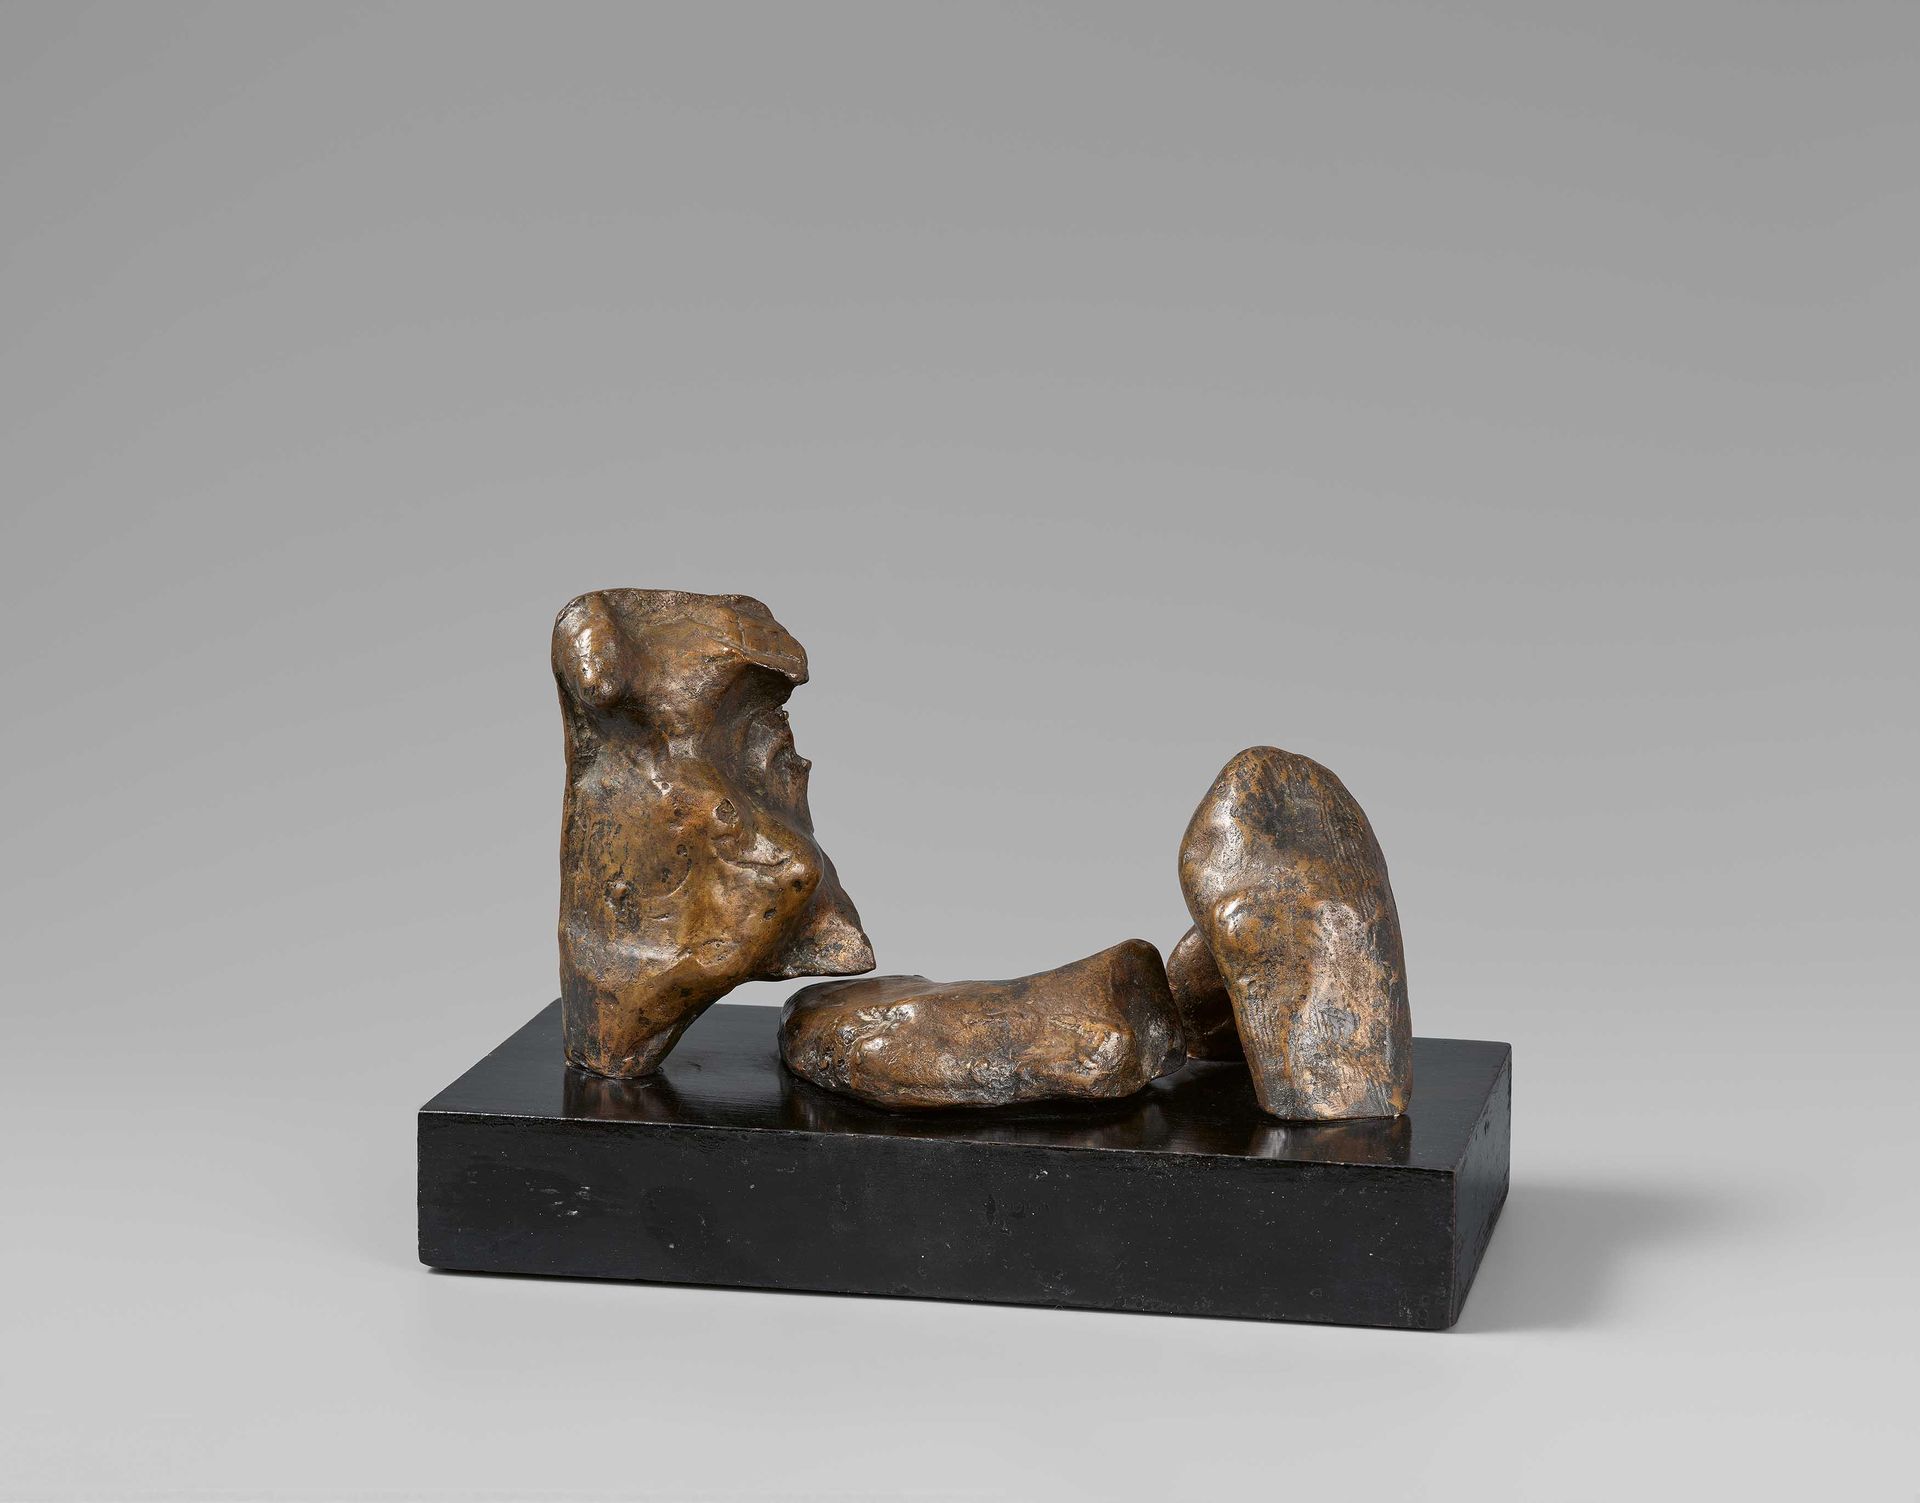 Henry Moore MOORE, HENRY
1898 Castleford/Yorkshire - 1986 Much Hadham

Título: F&hellip;